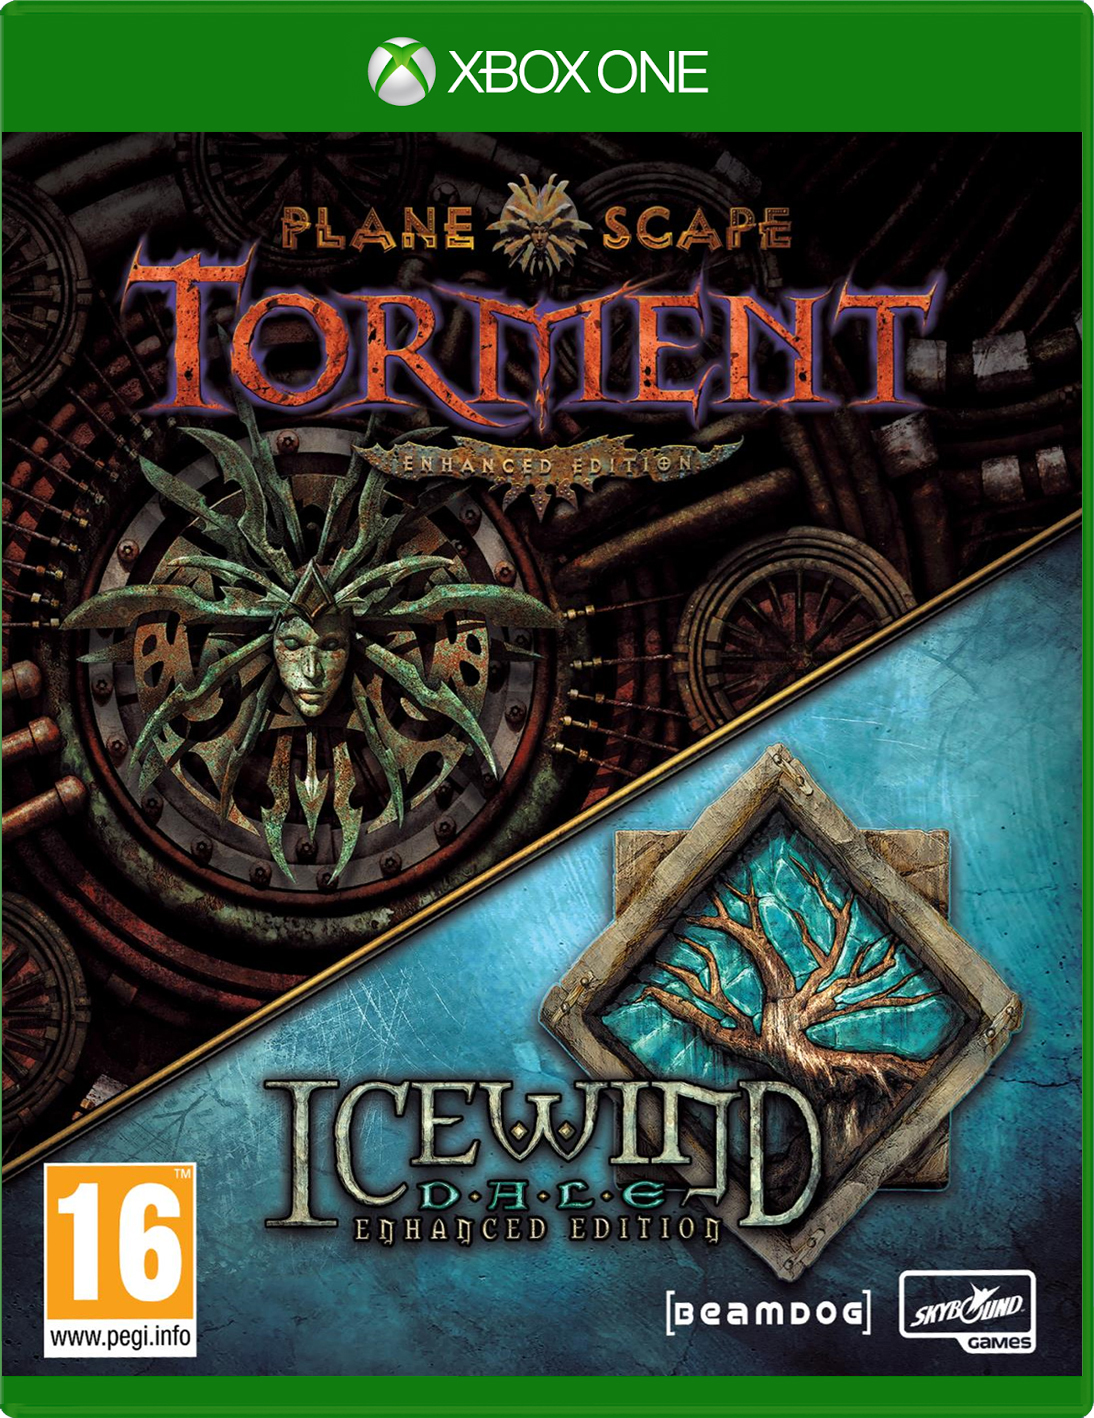 Skybound Games Planescape Torment / Icewind Dale Enhanced Editions - Xbox One Xbox One